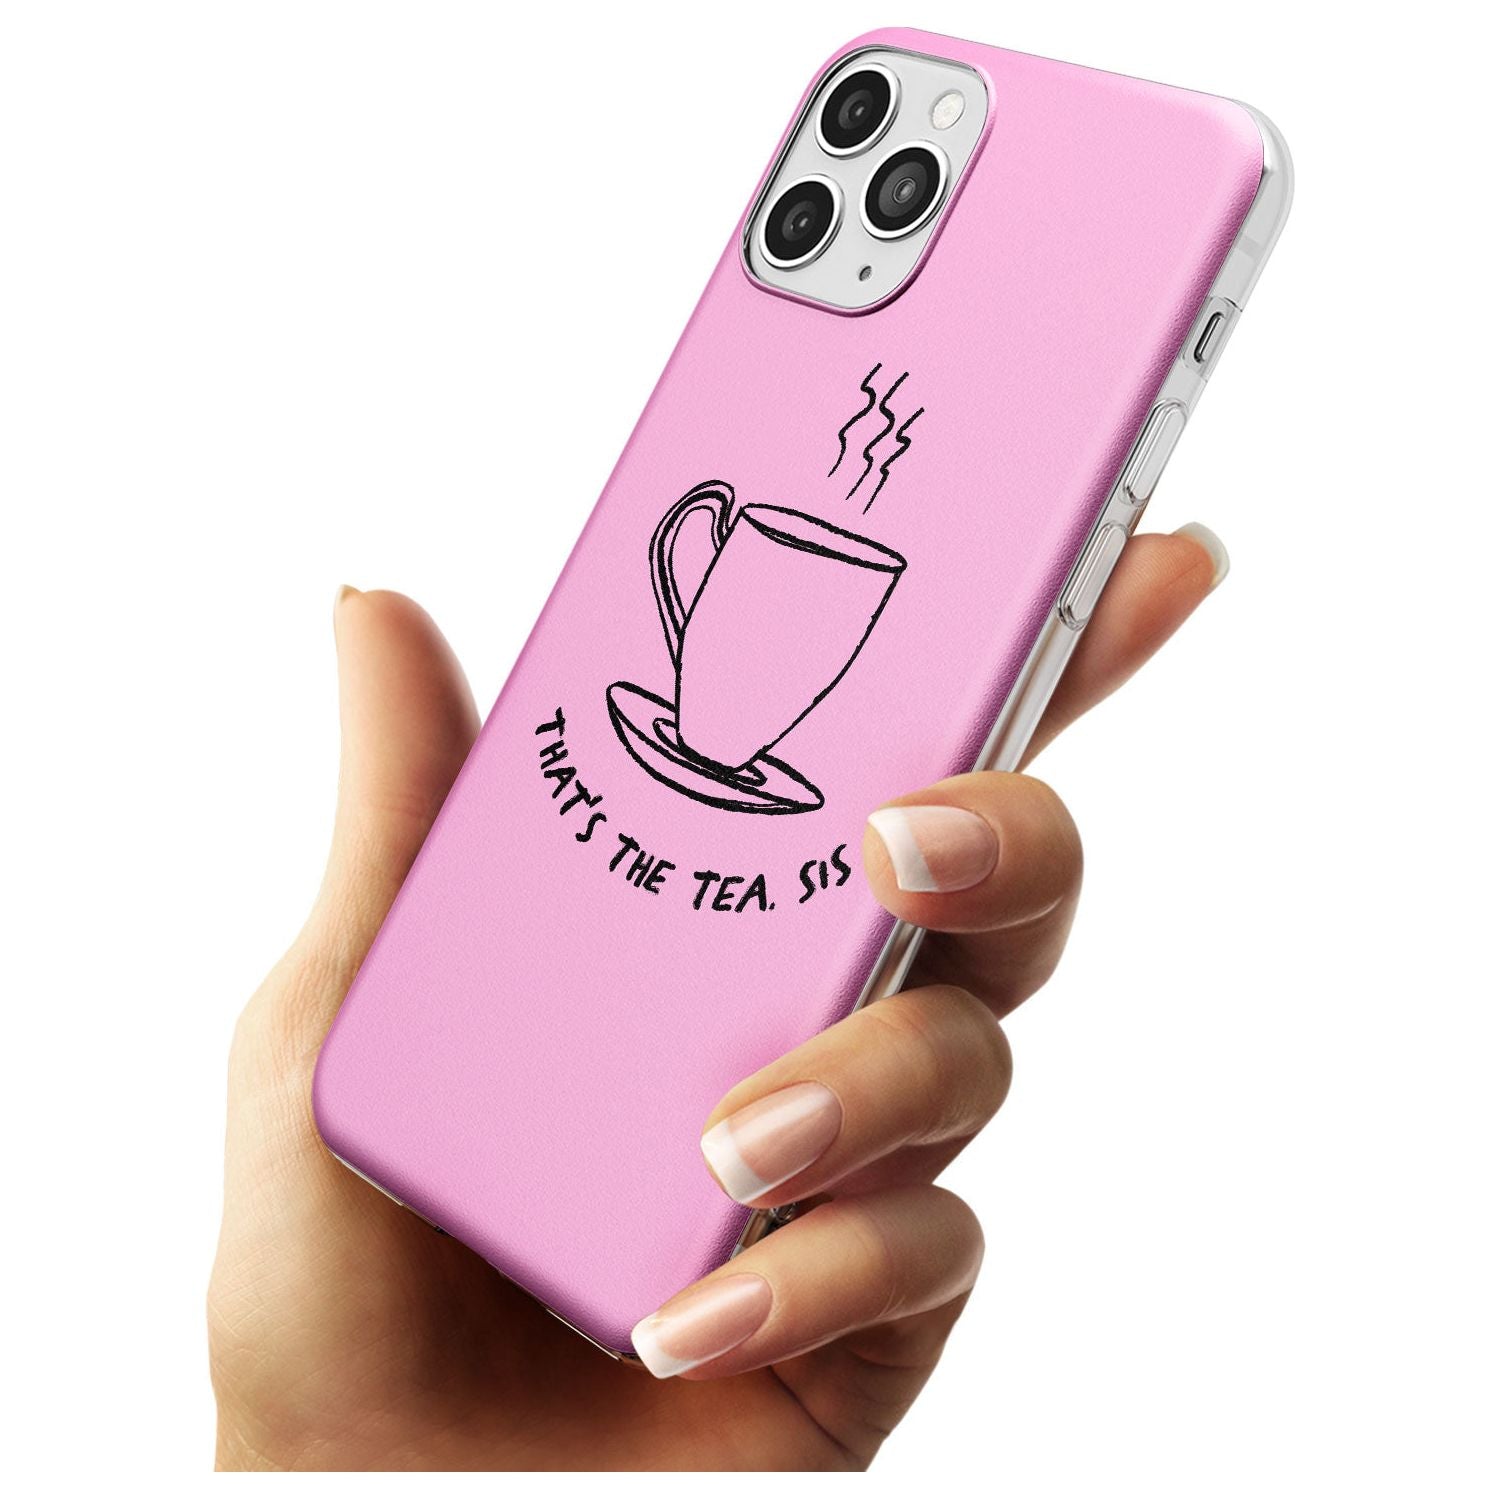 That's the Tea, Sis Pink Slim TPU Phone Case for iPhone 11 Pro Max